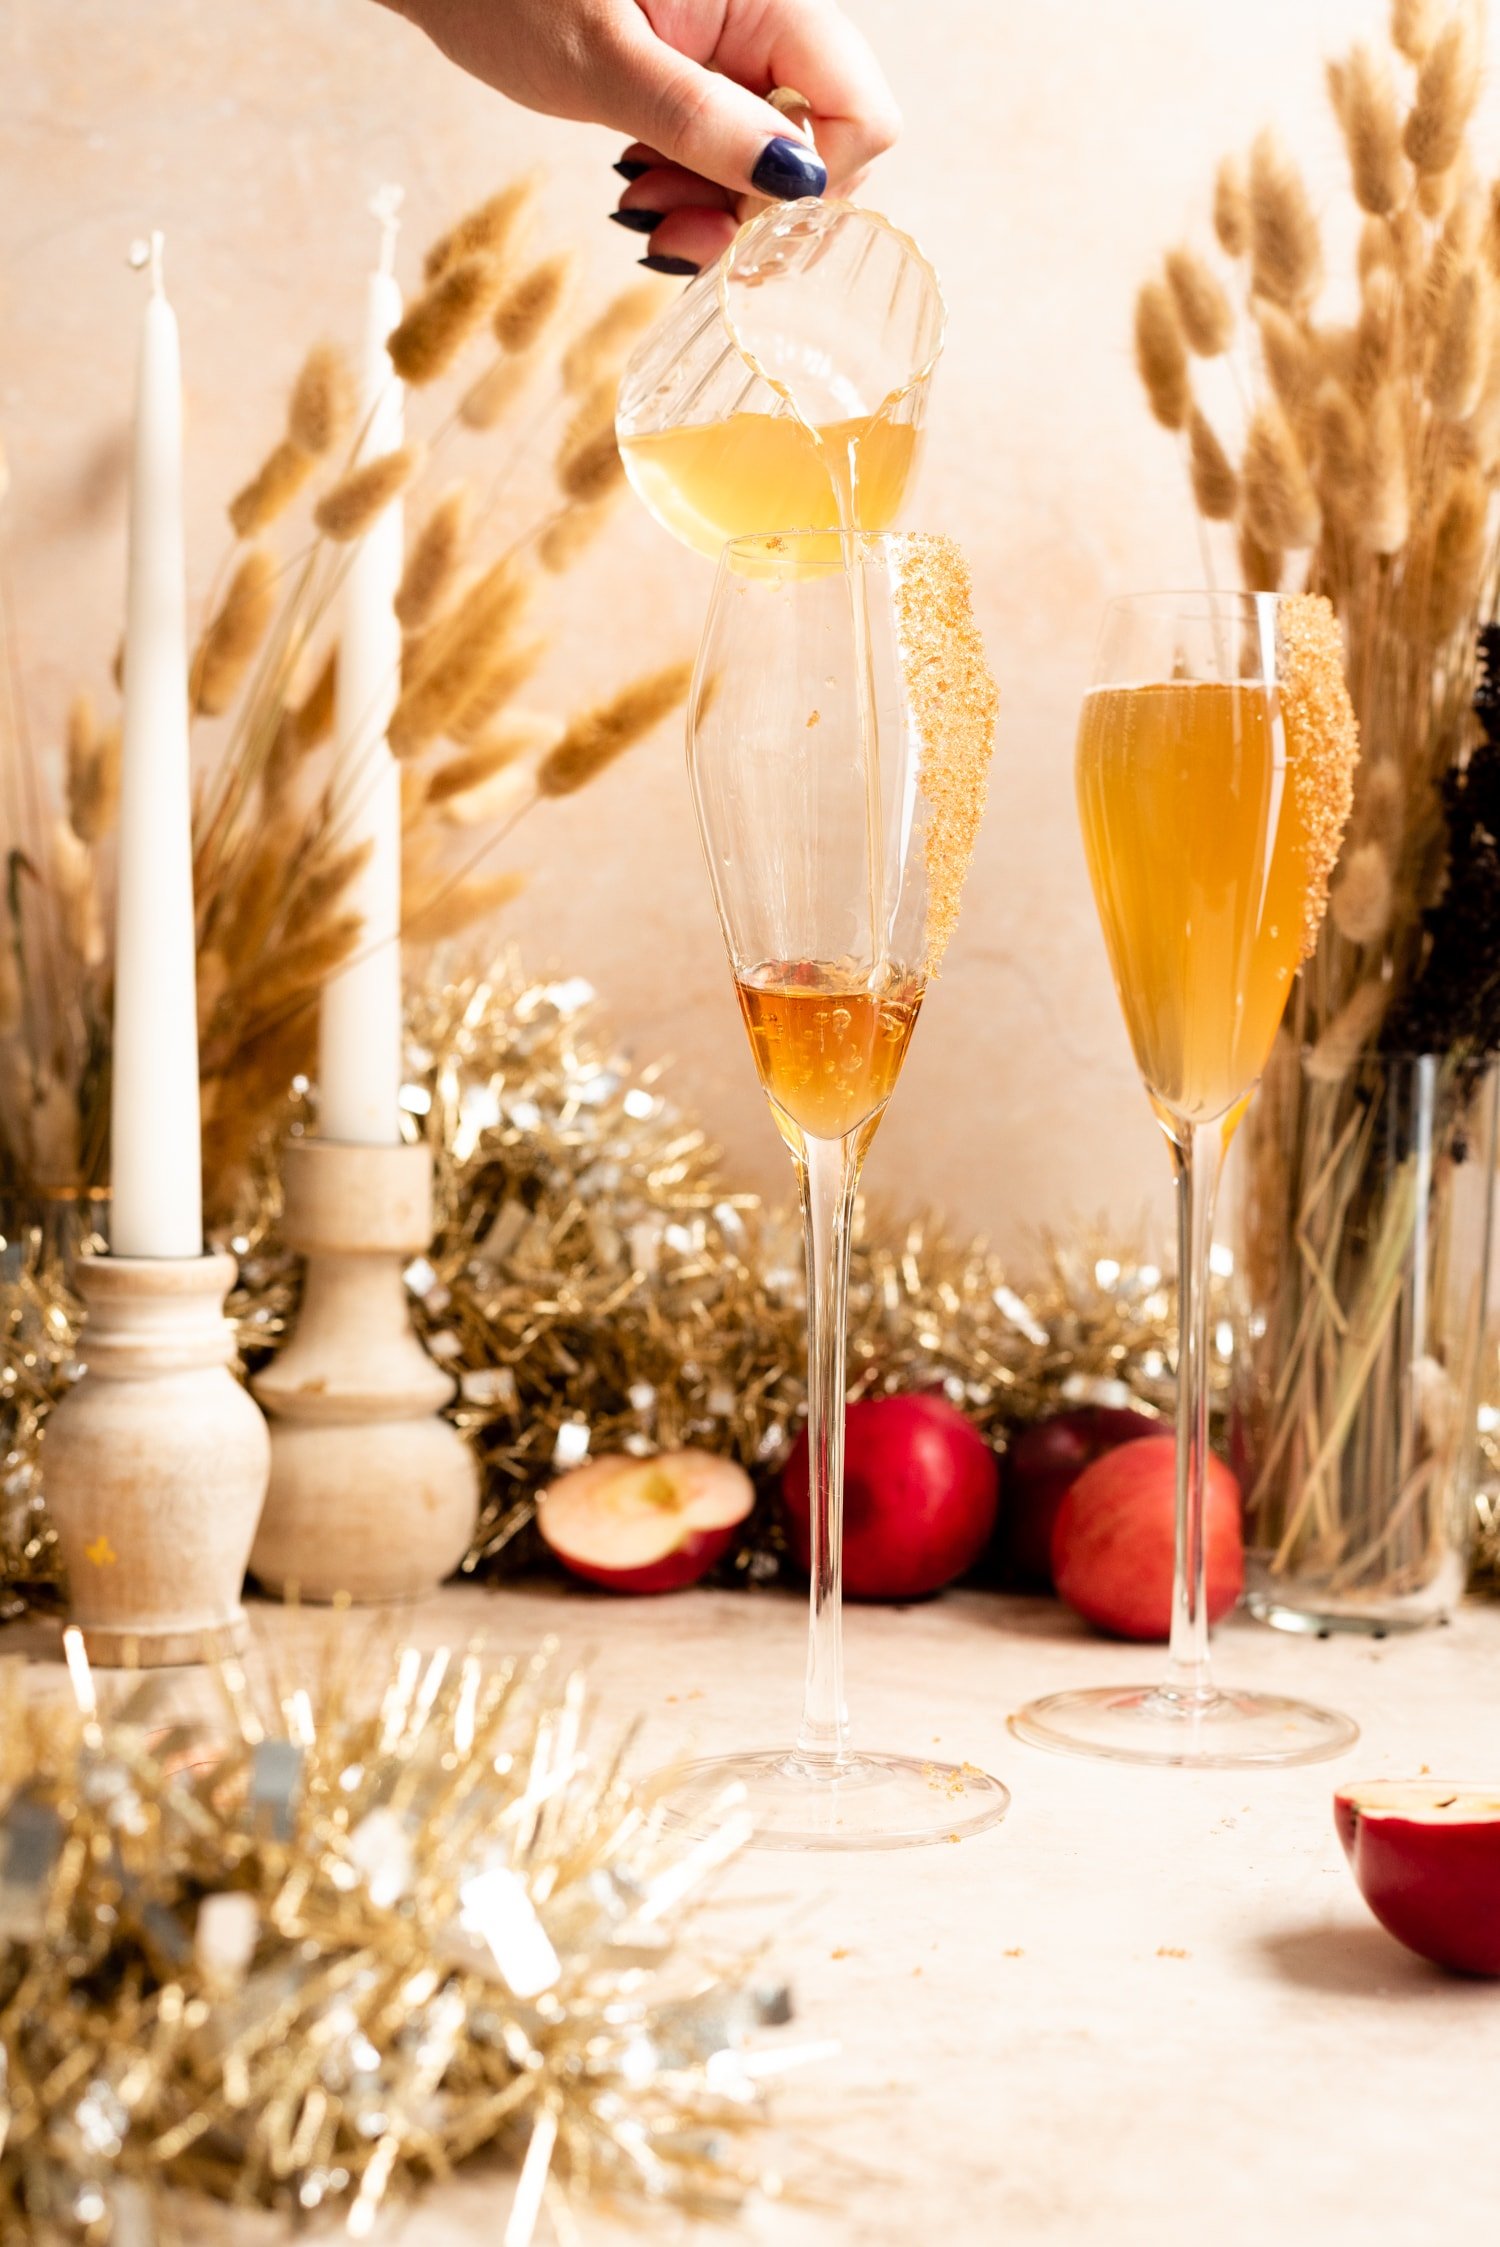 Apple cider being poured into the champagne flute.